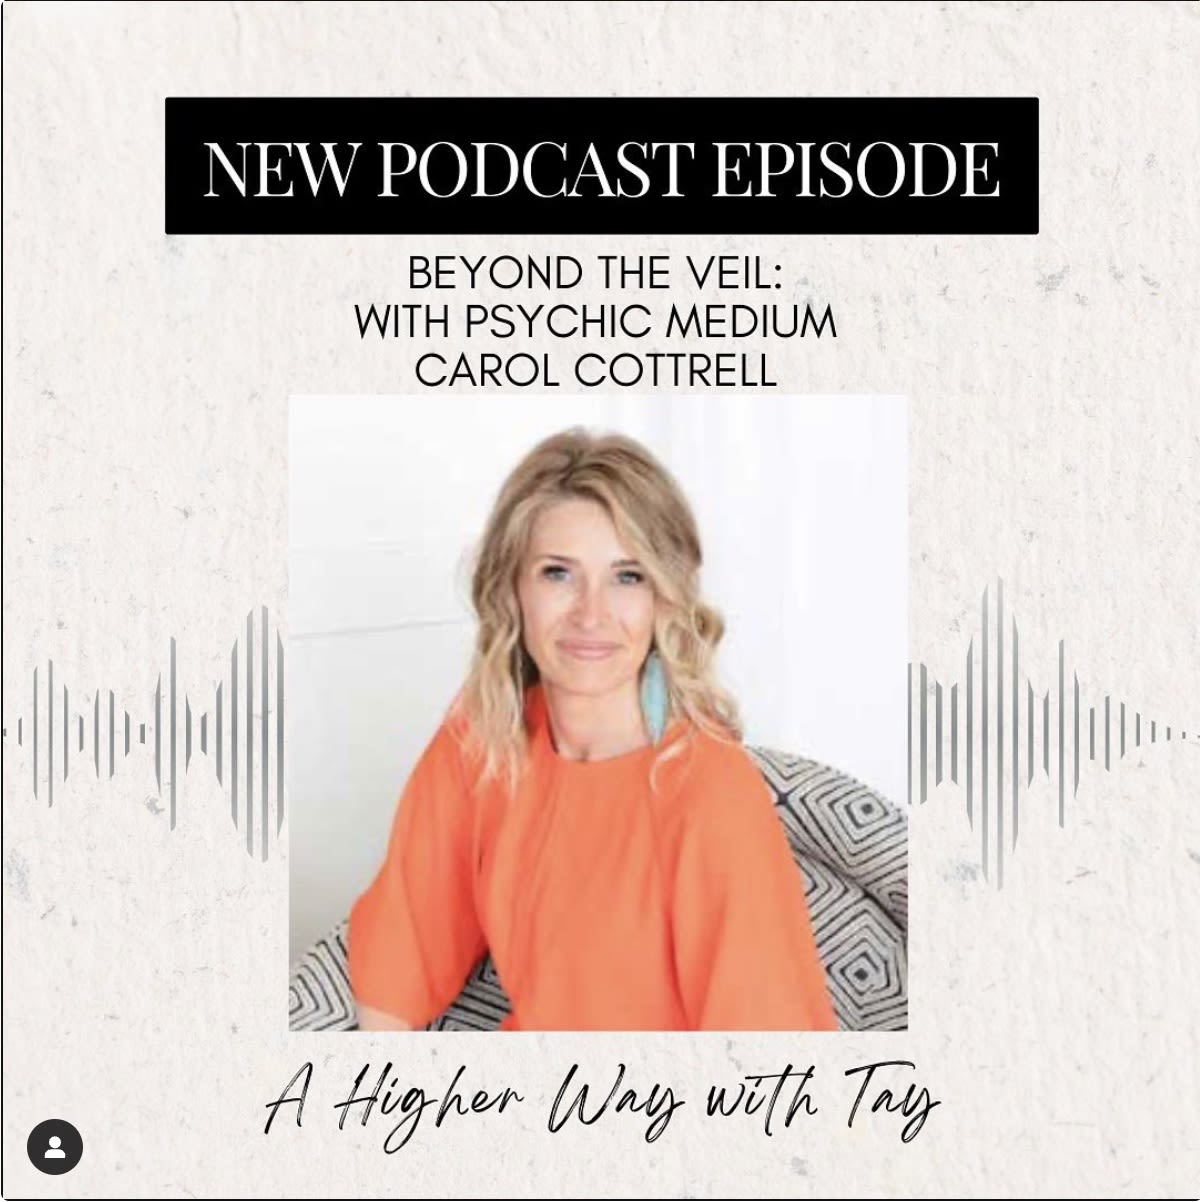 beyond the veil with psychic medium carol cottrell podcast episode